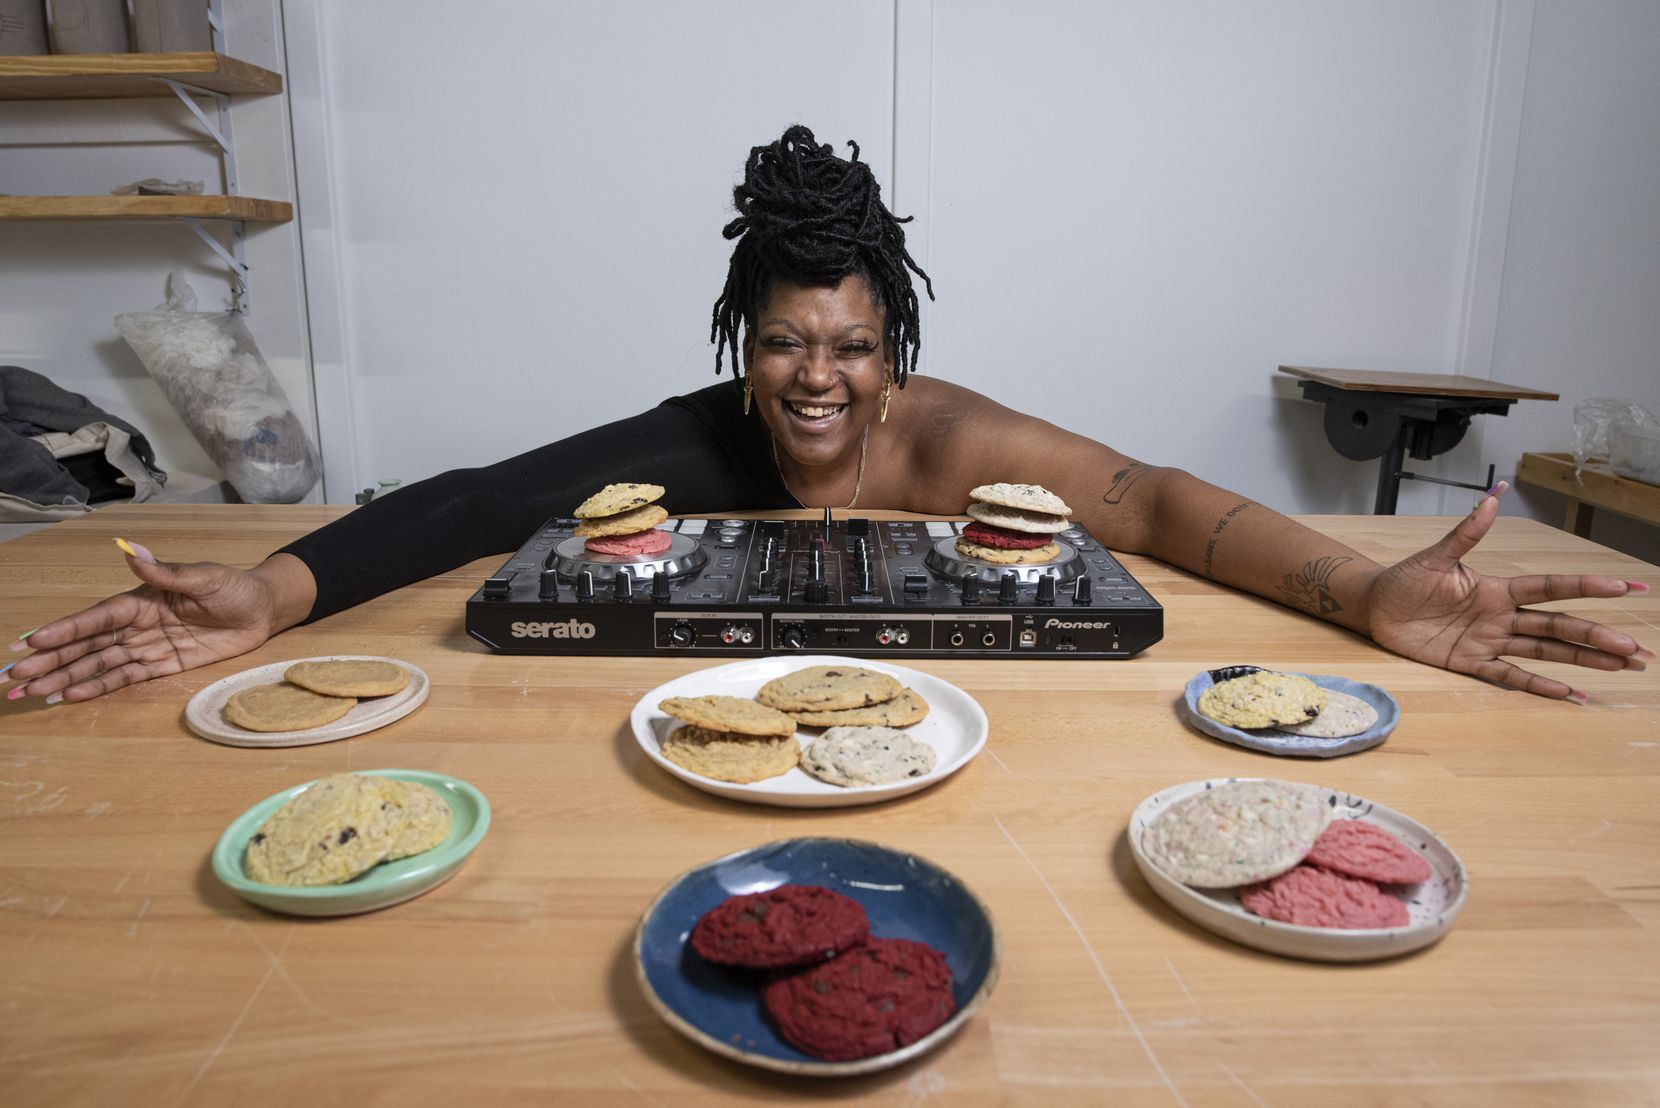 Rachel Harvey, also known as DJ Ursa Minor, with some of her cookies she bakes under the name of The Butter Fairy.